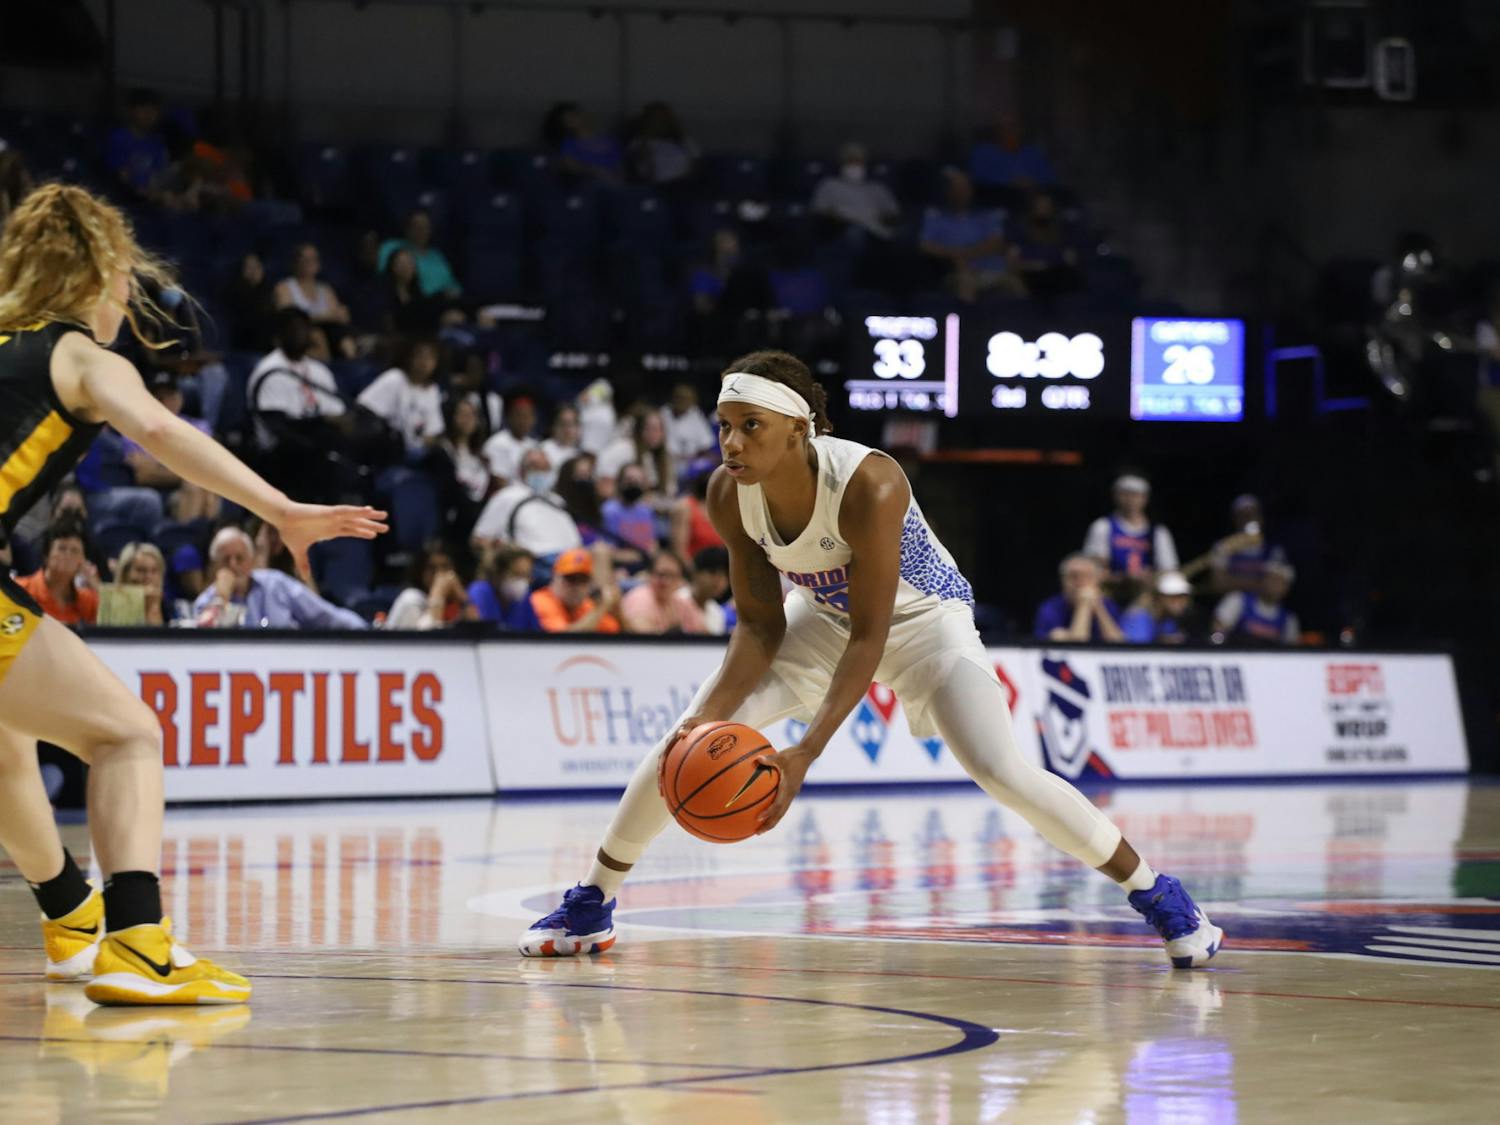 Junior guard Nina Rickards possesses the ball against Missouri Feb. 27. In Florida's opening game of the SEC Tournament Rickards led the way with 15 points and eight rebounds.